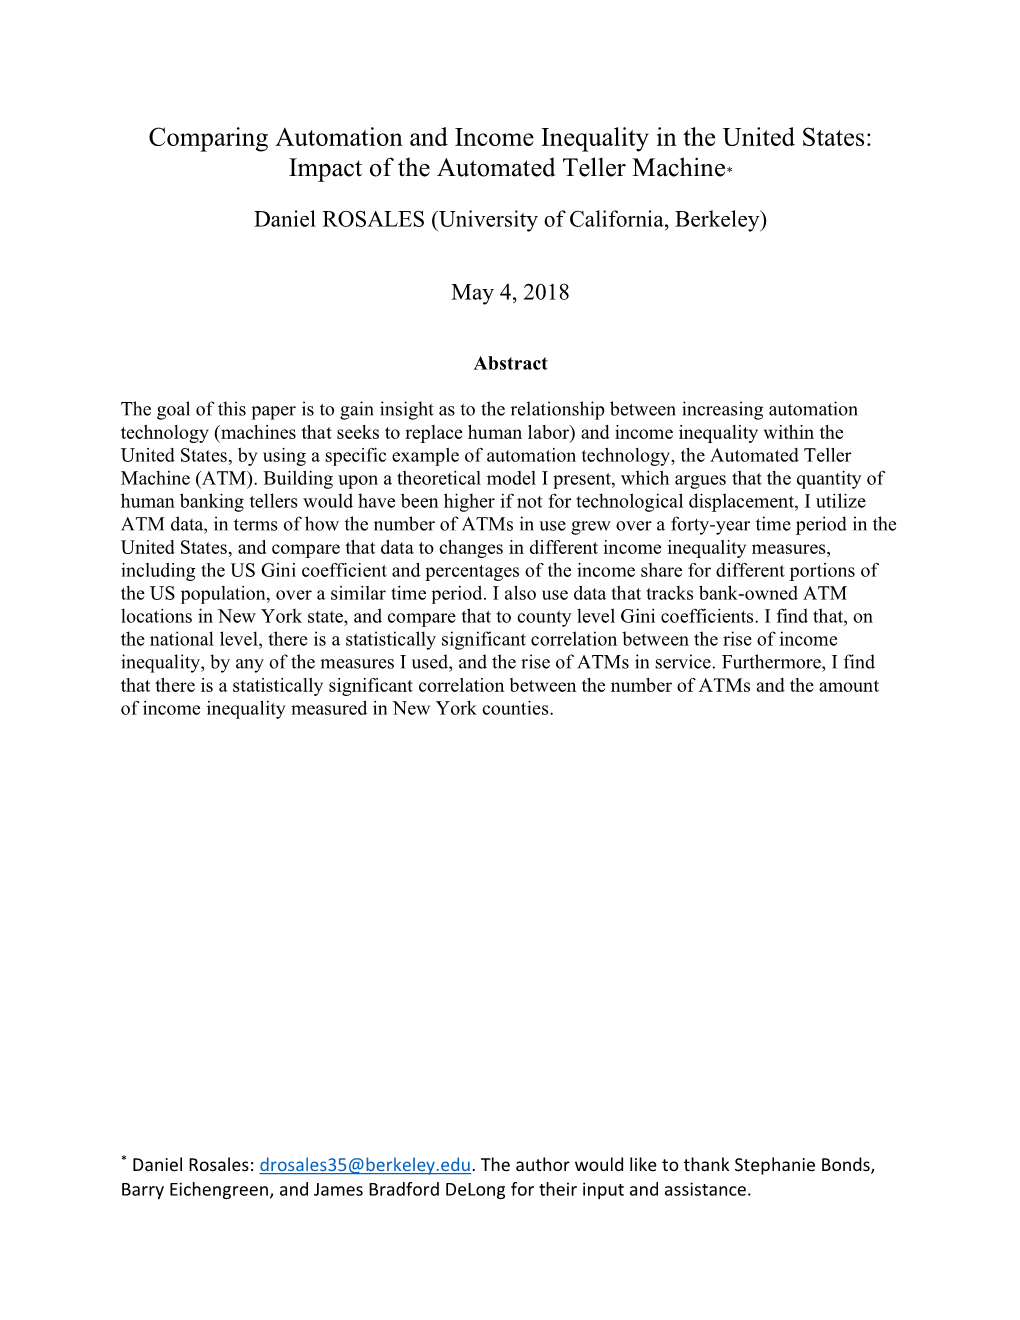 Comparing Automation and Income Inequality in the United States: Impact of the Automated Teller Machine*